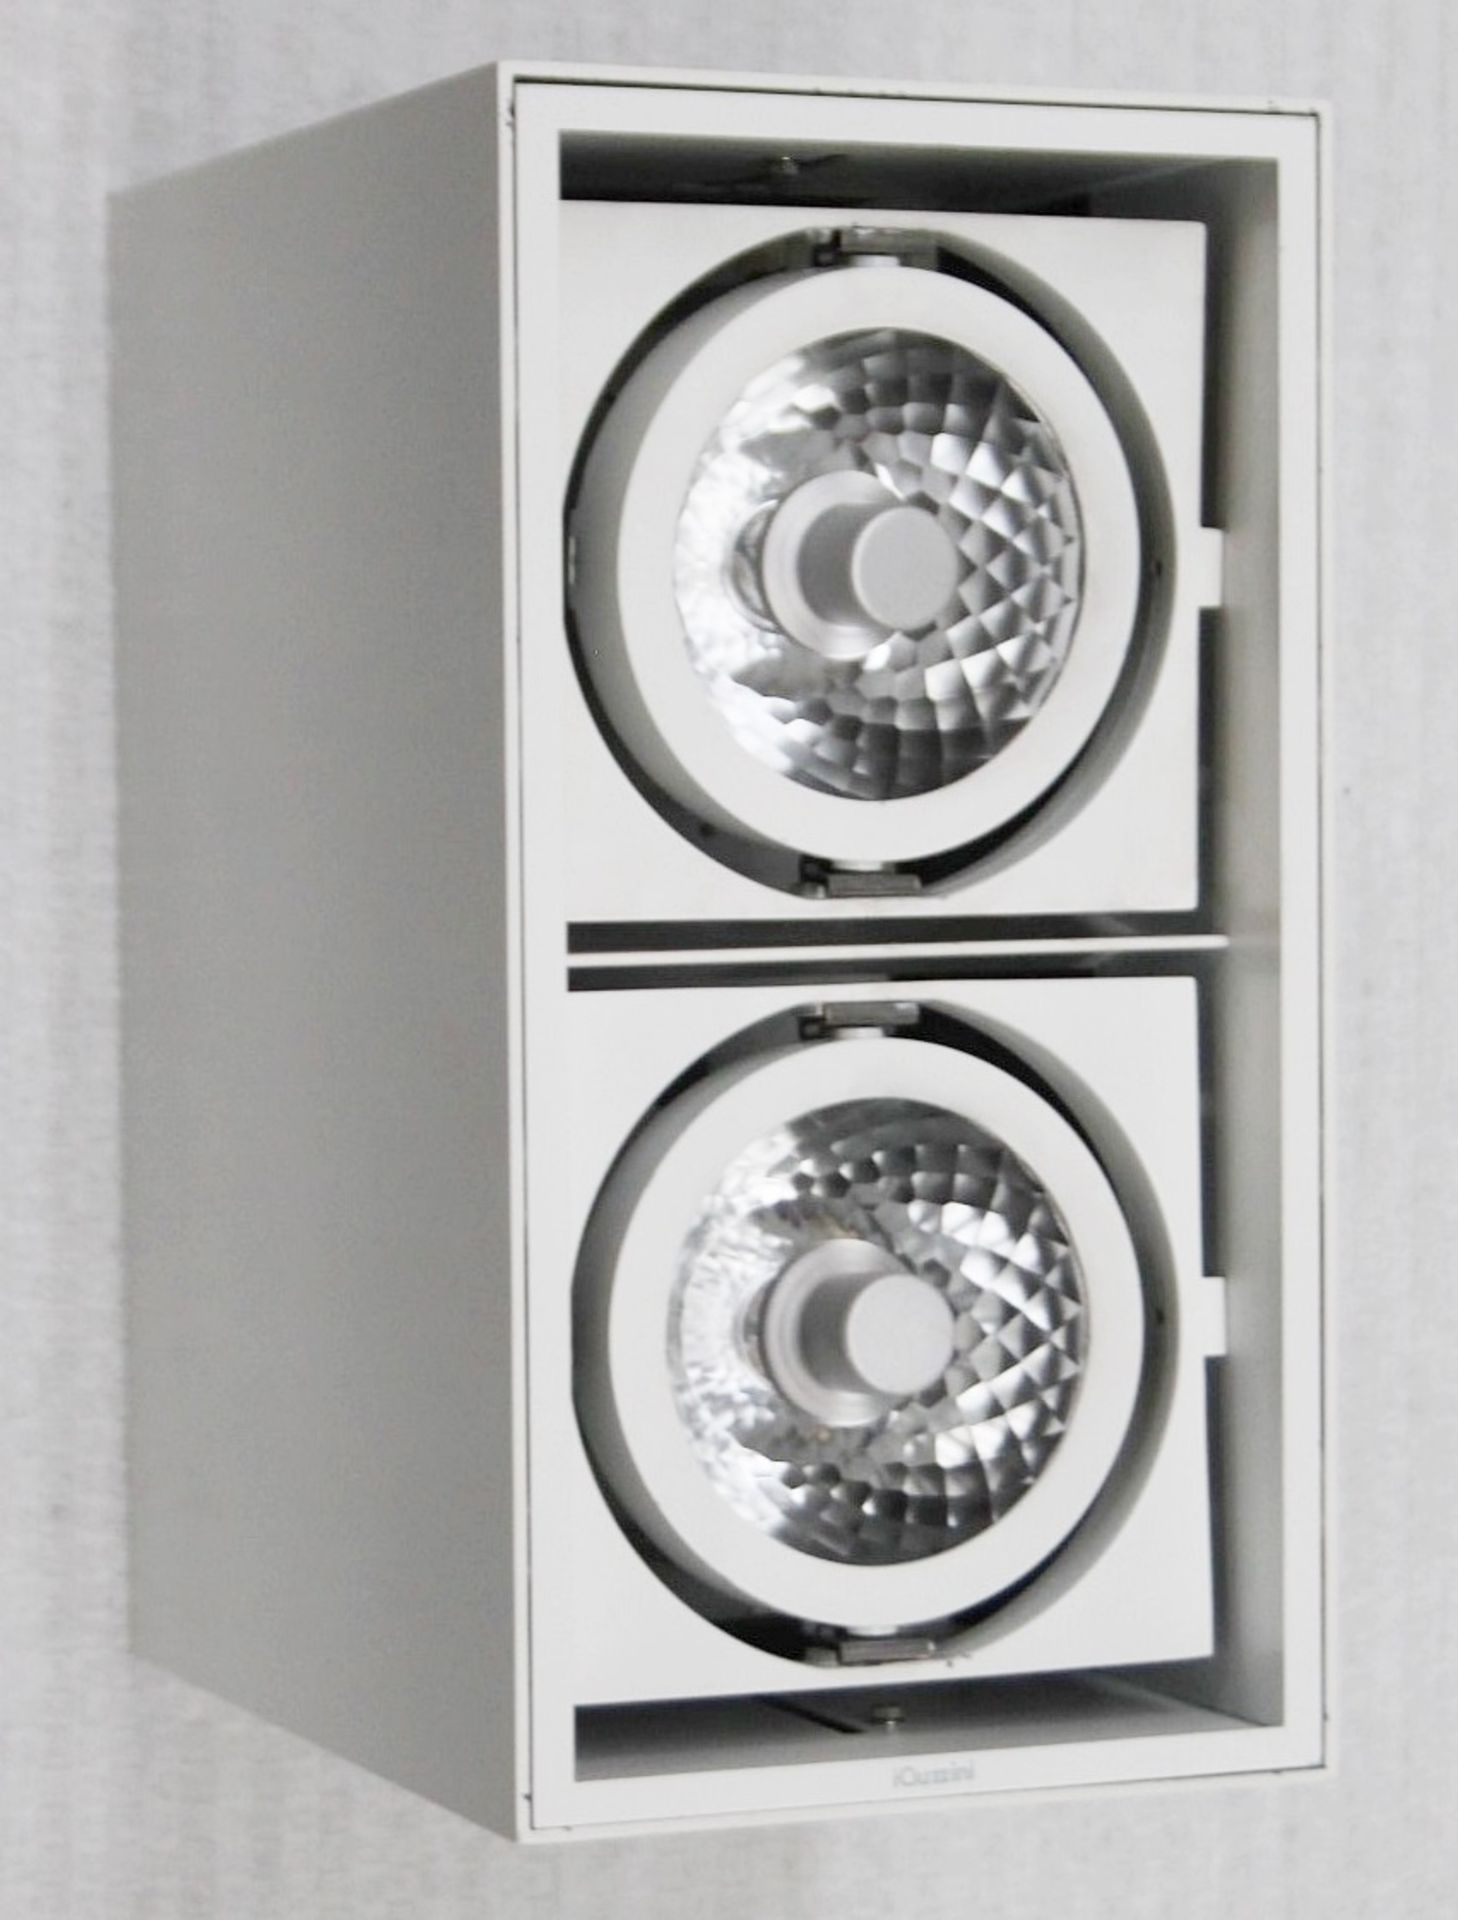 4 x IGUZZINI Commercial Twin Directional Gimble Spot Light Fittings In Metal Casings (5326) - Image 7 of 7